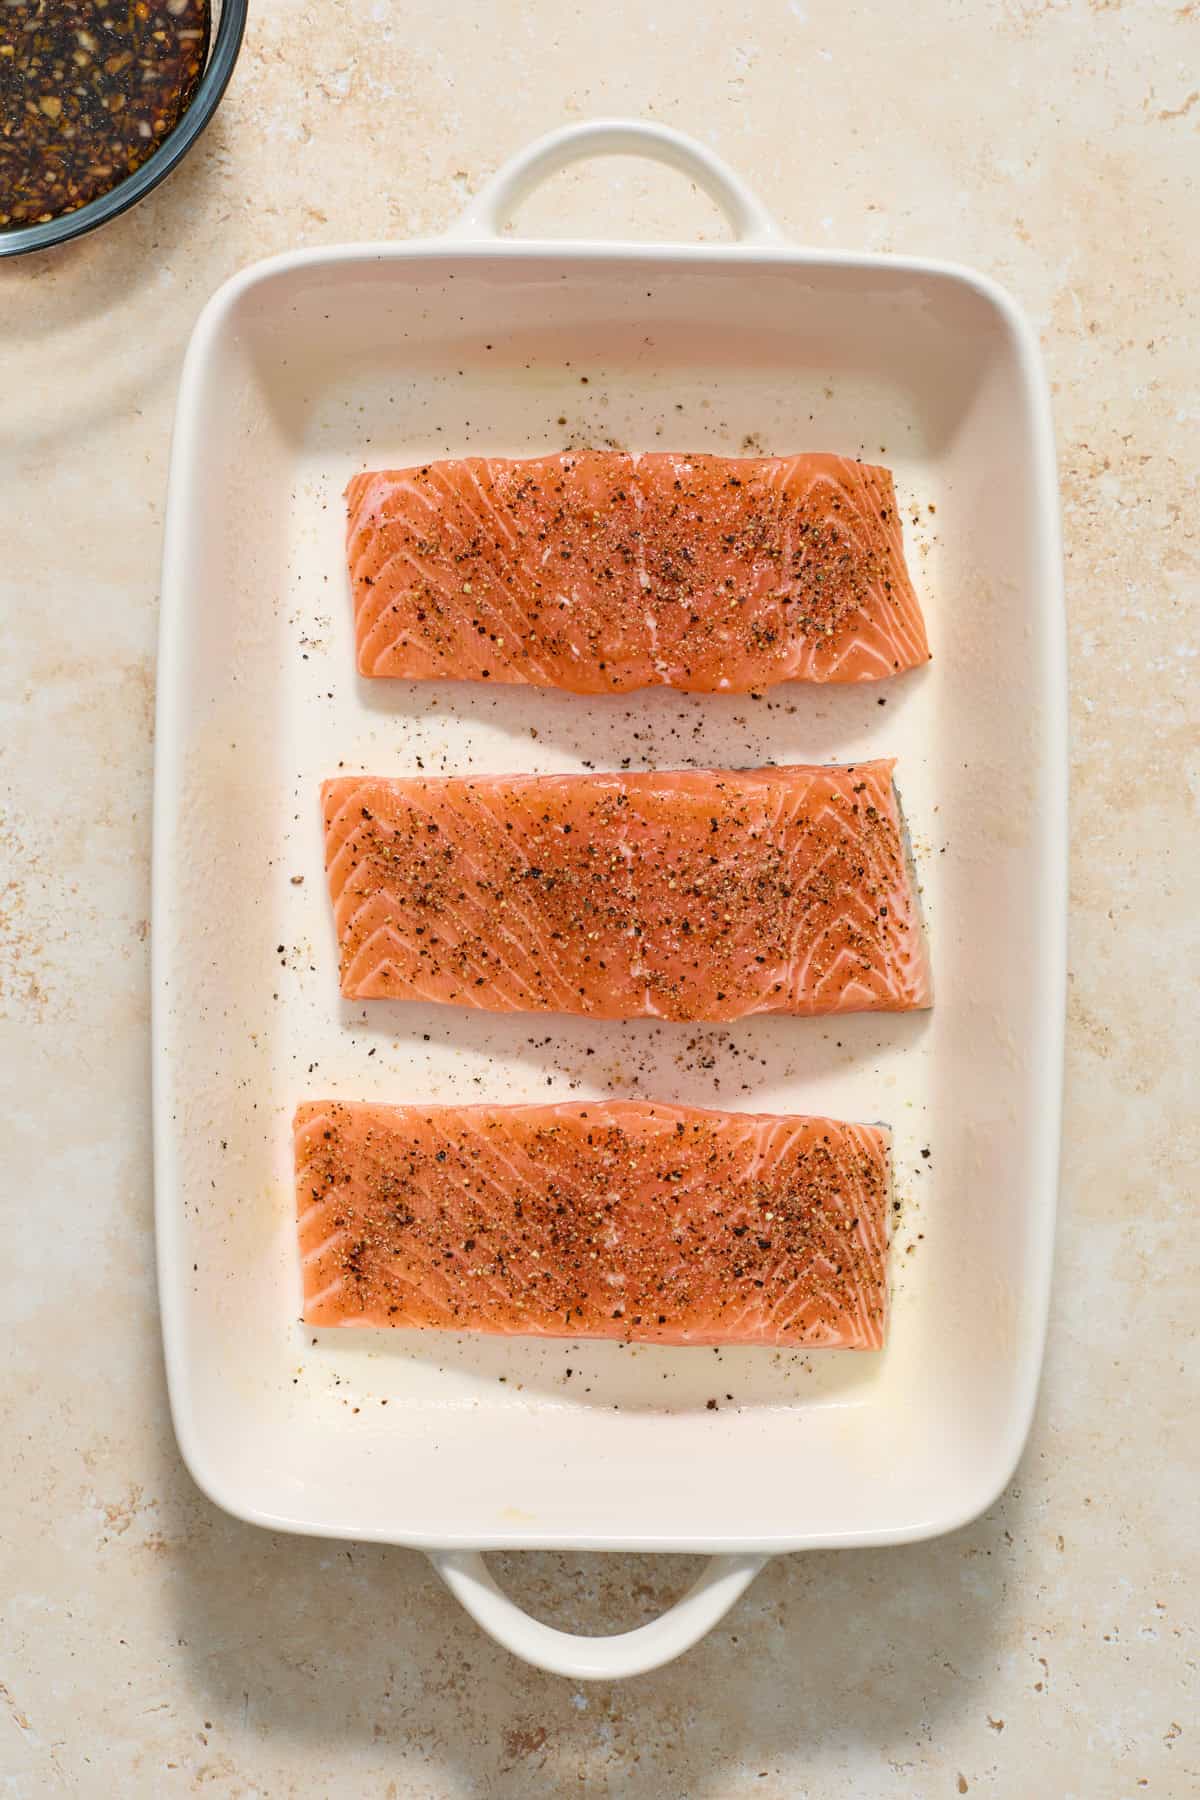 Salmon fillets in white baking pan seasoned with salt and pepper.